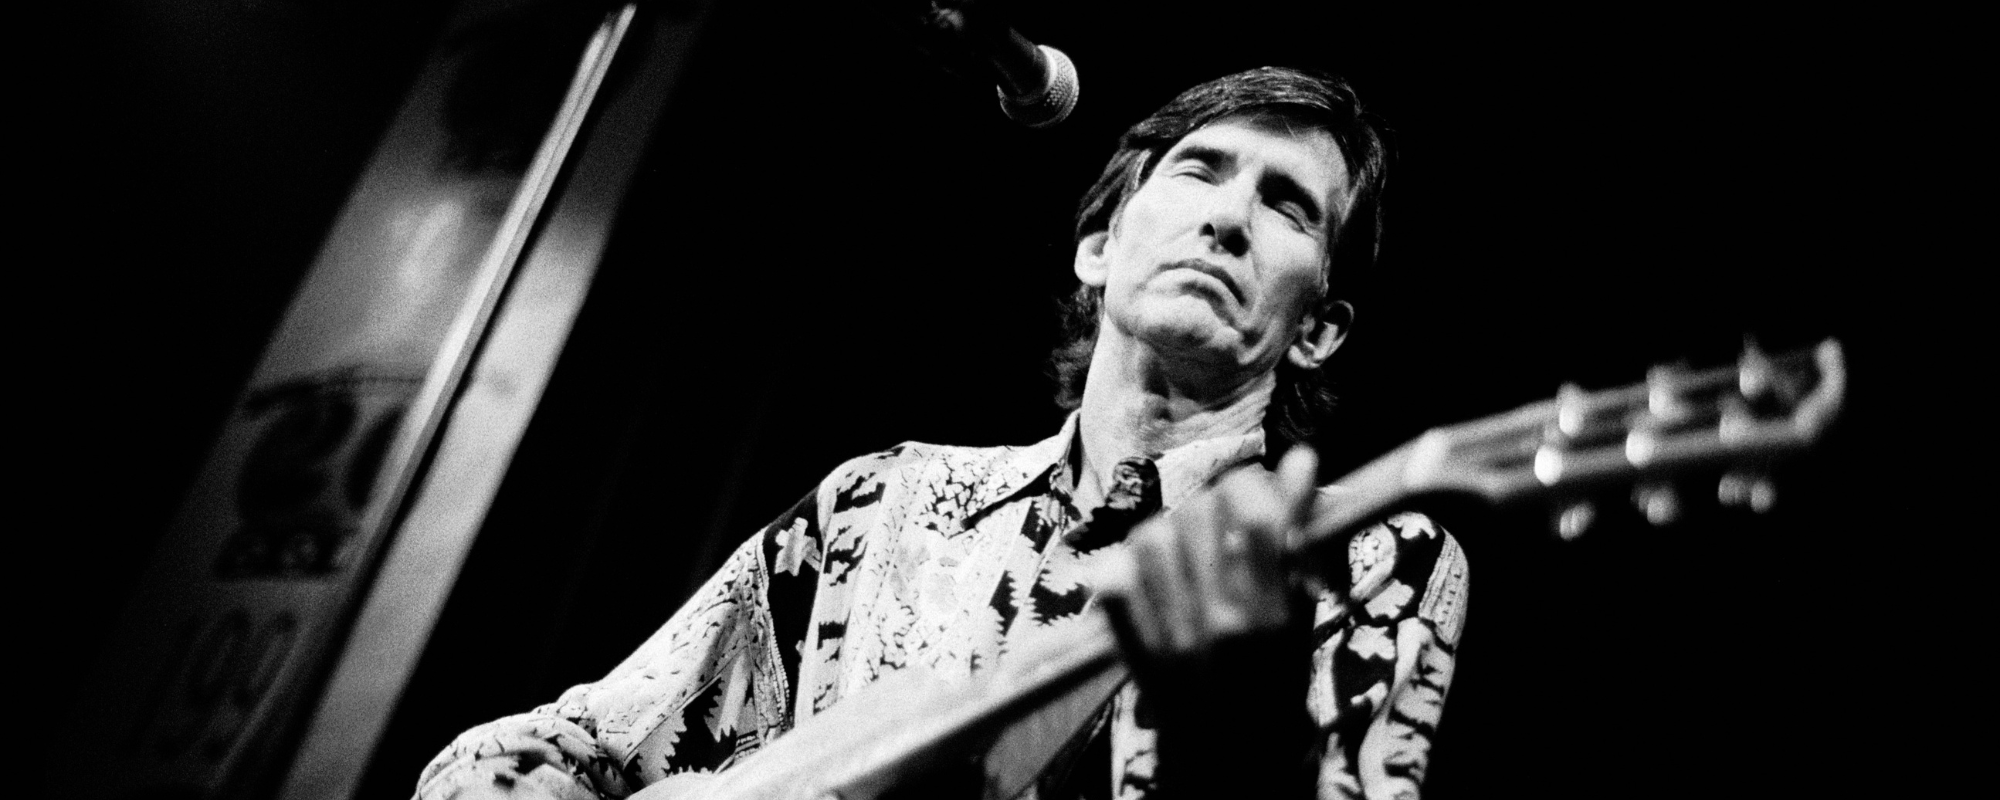 The Meaning Behind Townes Van Zandt’s ‘Pancho and Lefty’